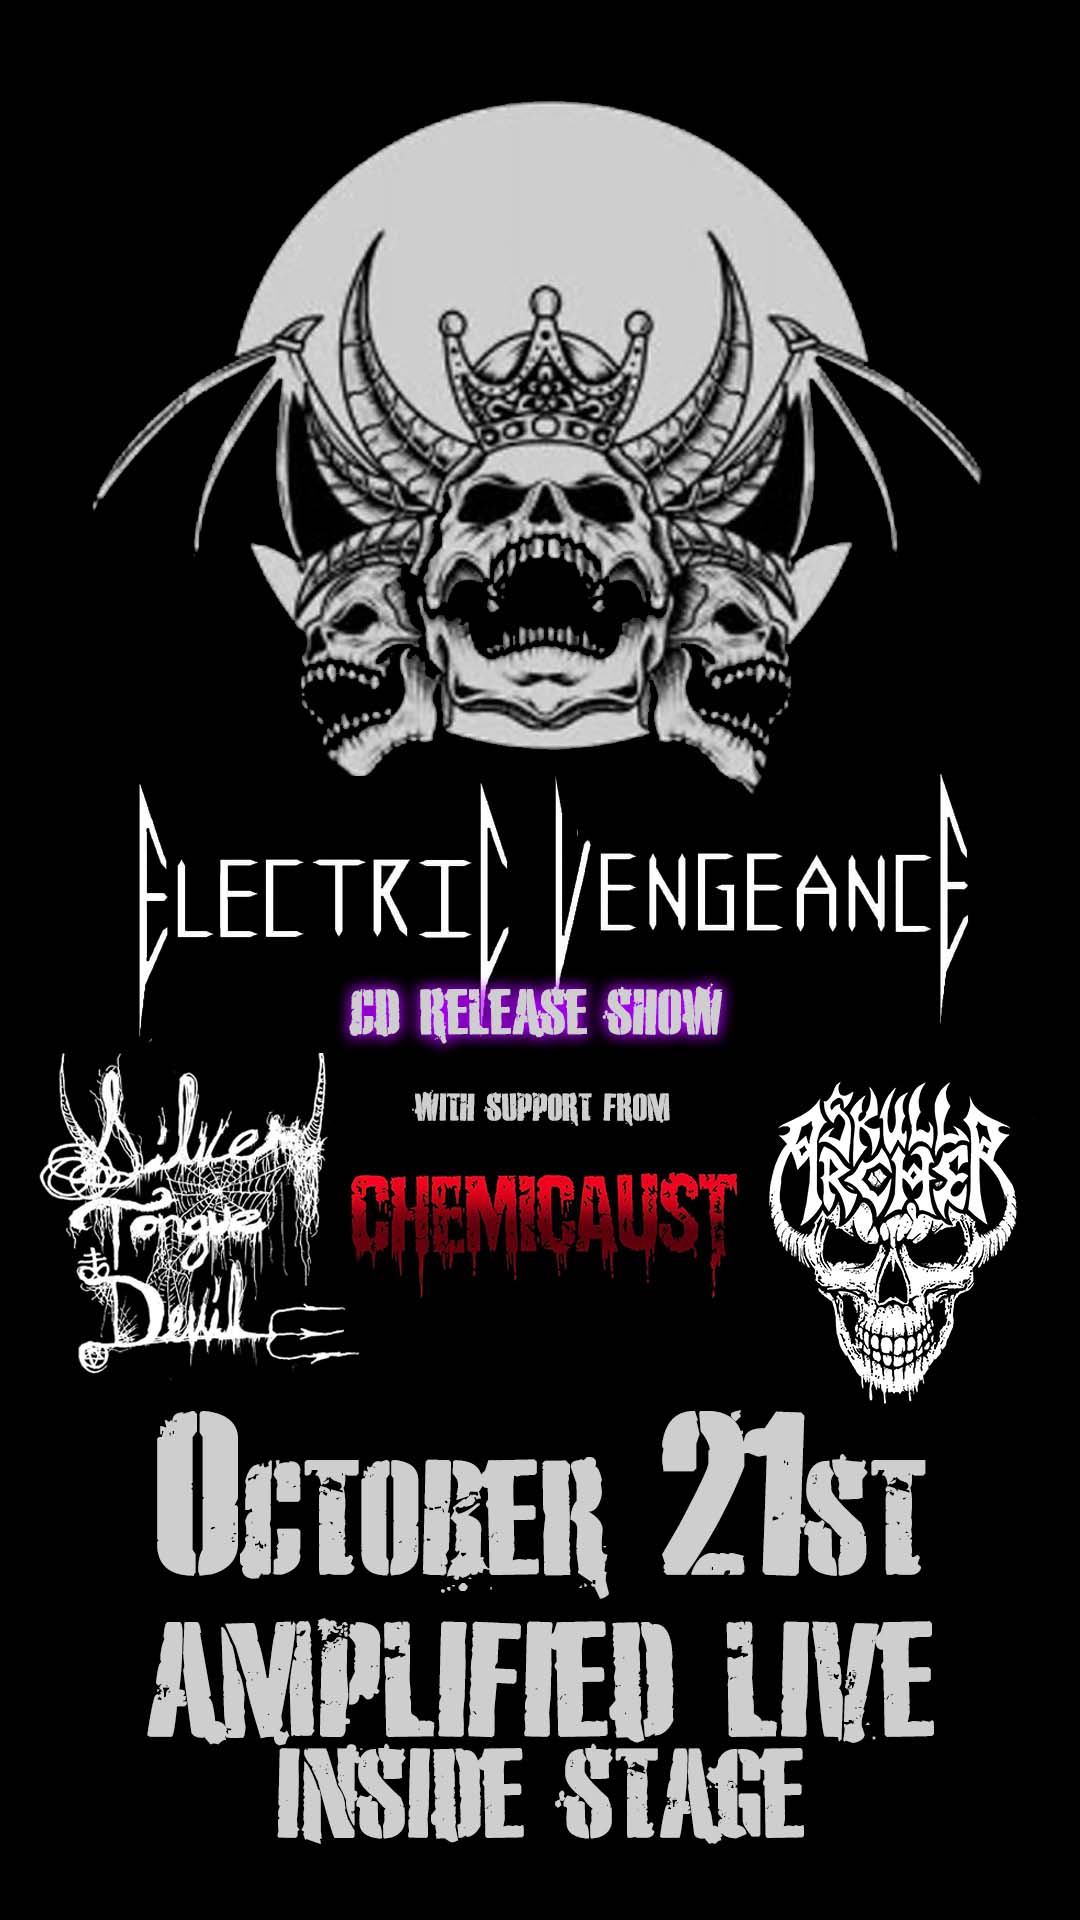 Electric Vengeance CD Release Show – INSIDE STAGE